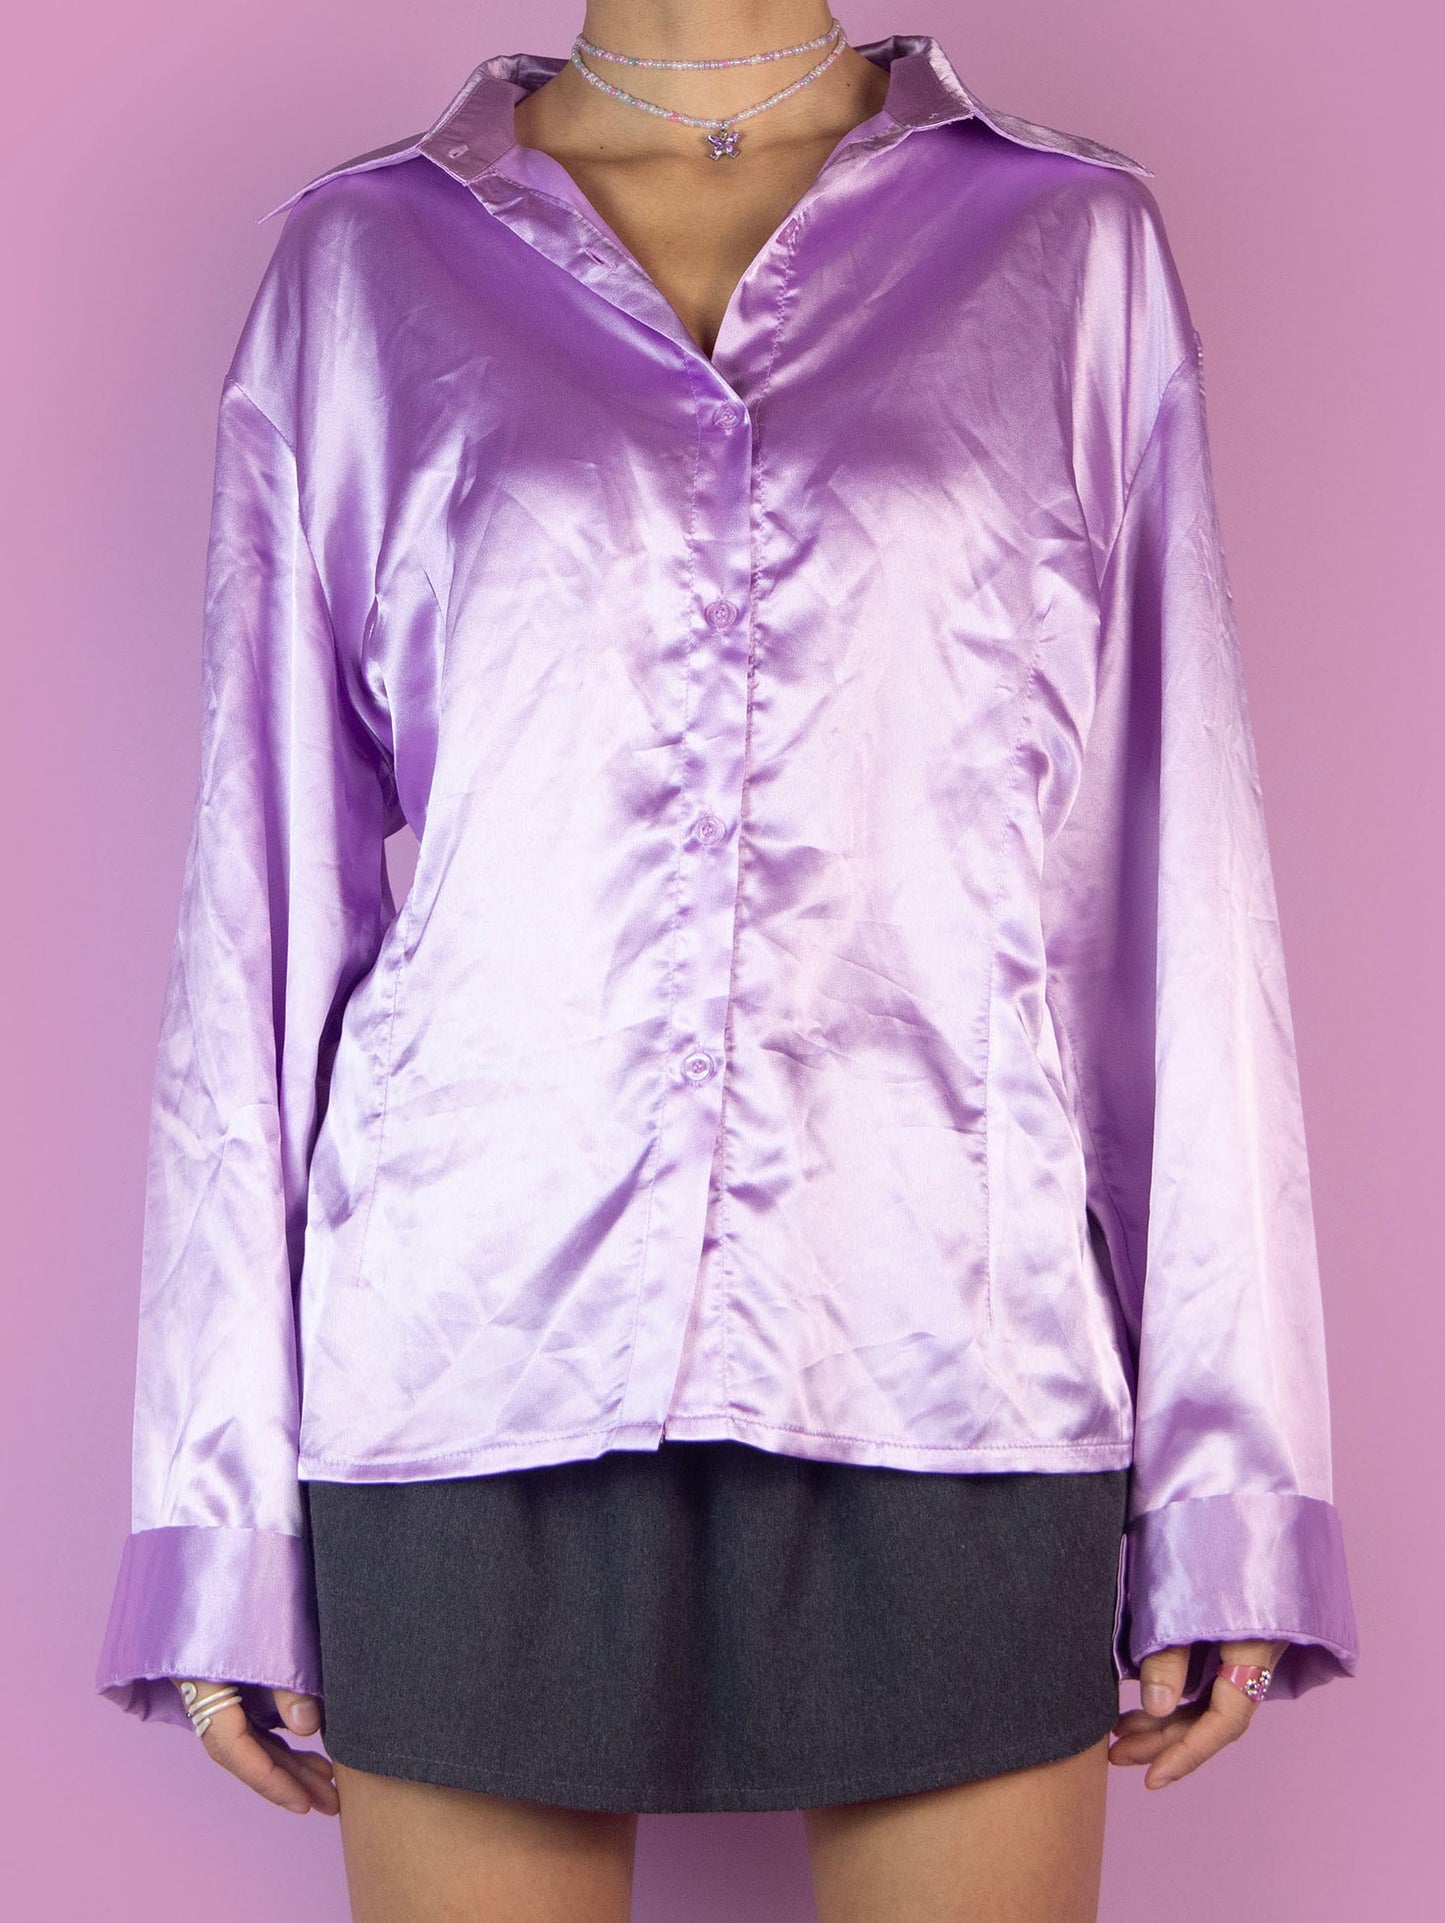 The Y2K Lilac Satin Blouse features a button-down front, long sleeves, and a pointed collar. This vintage 2000s purple shirt has a shiny, smooth texture, adding a touch of elegance to any office work outfit.